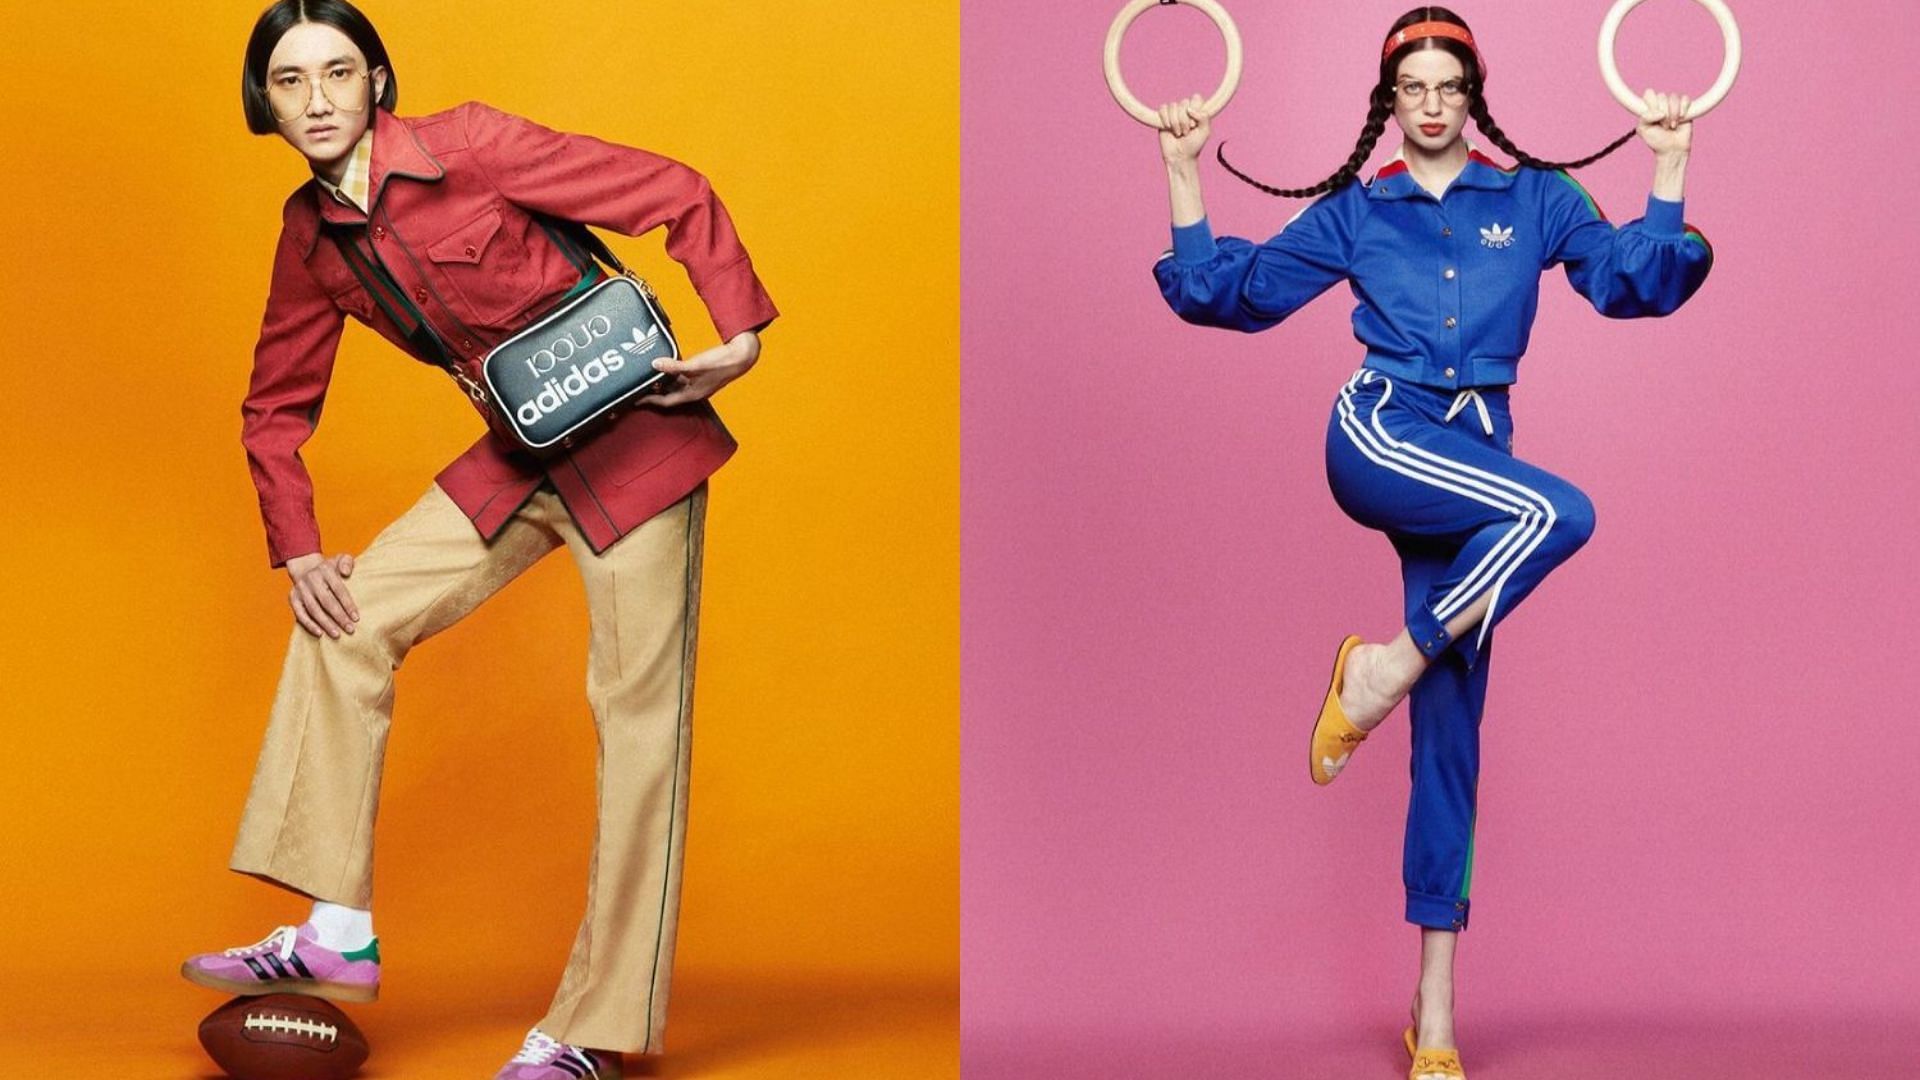 Gucci x Adidas collaborated for a sports-inspired capsule collection (Image via Gucci)